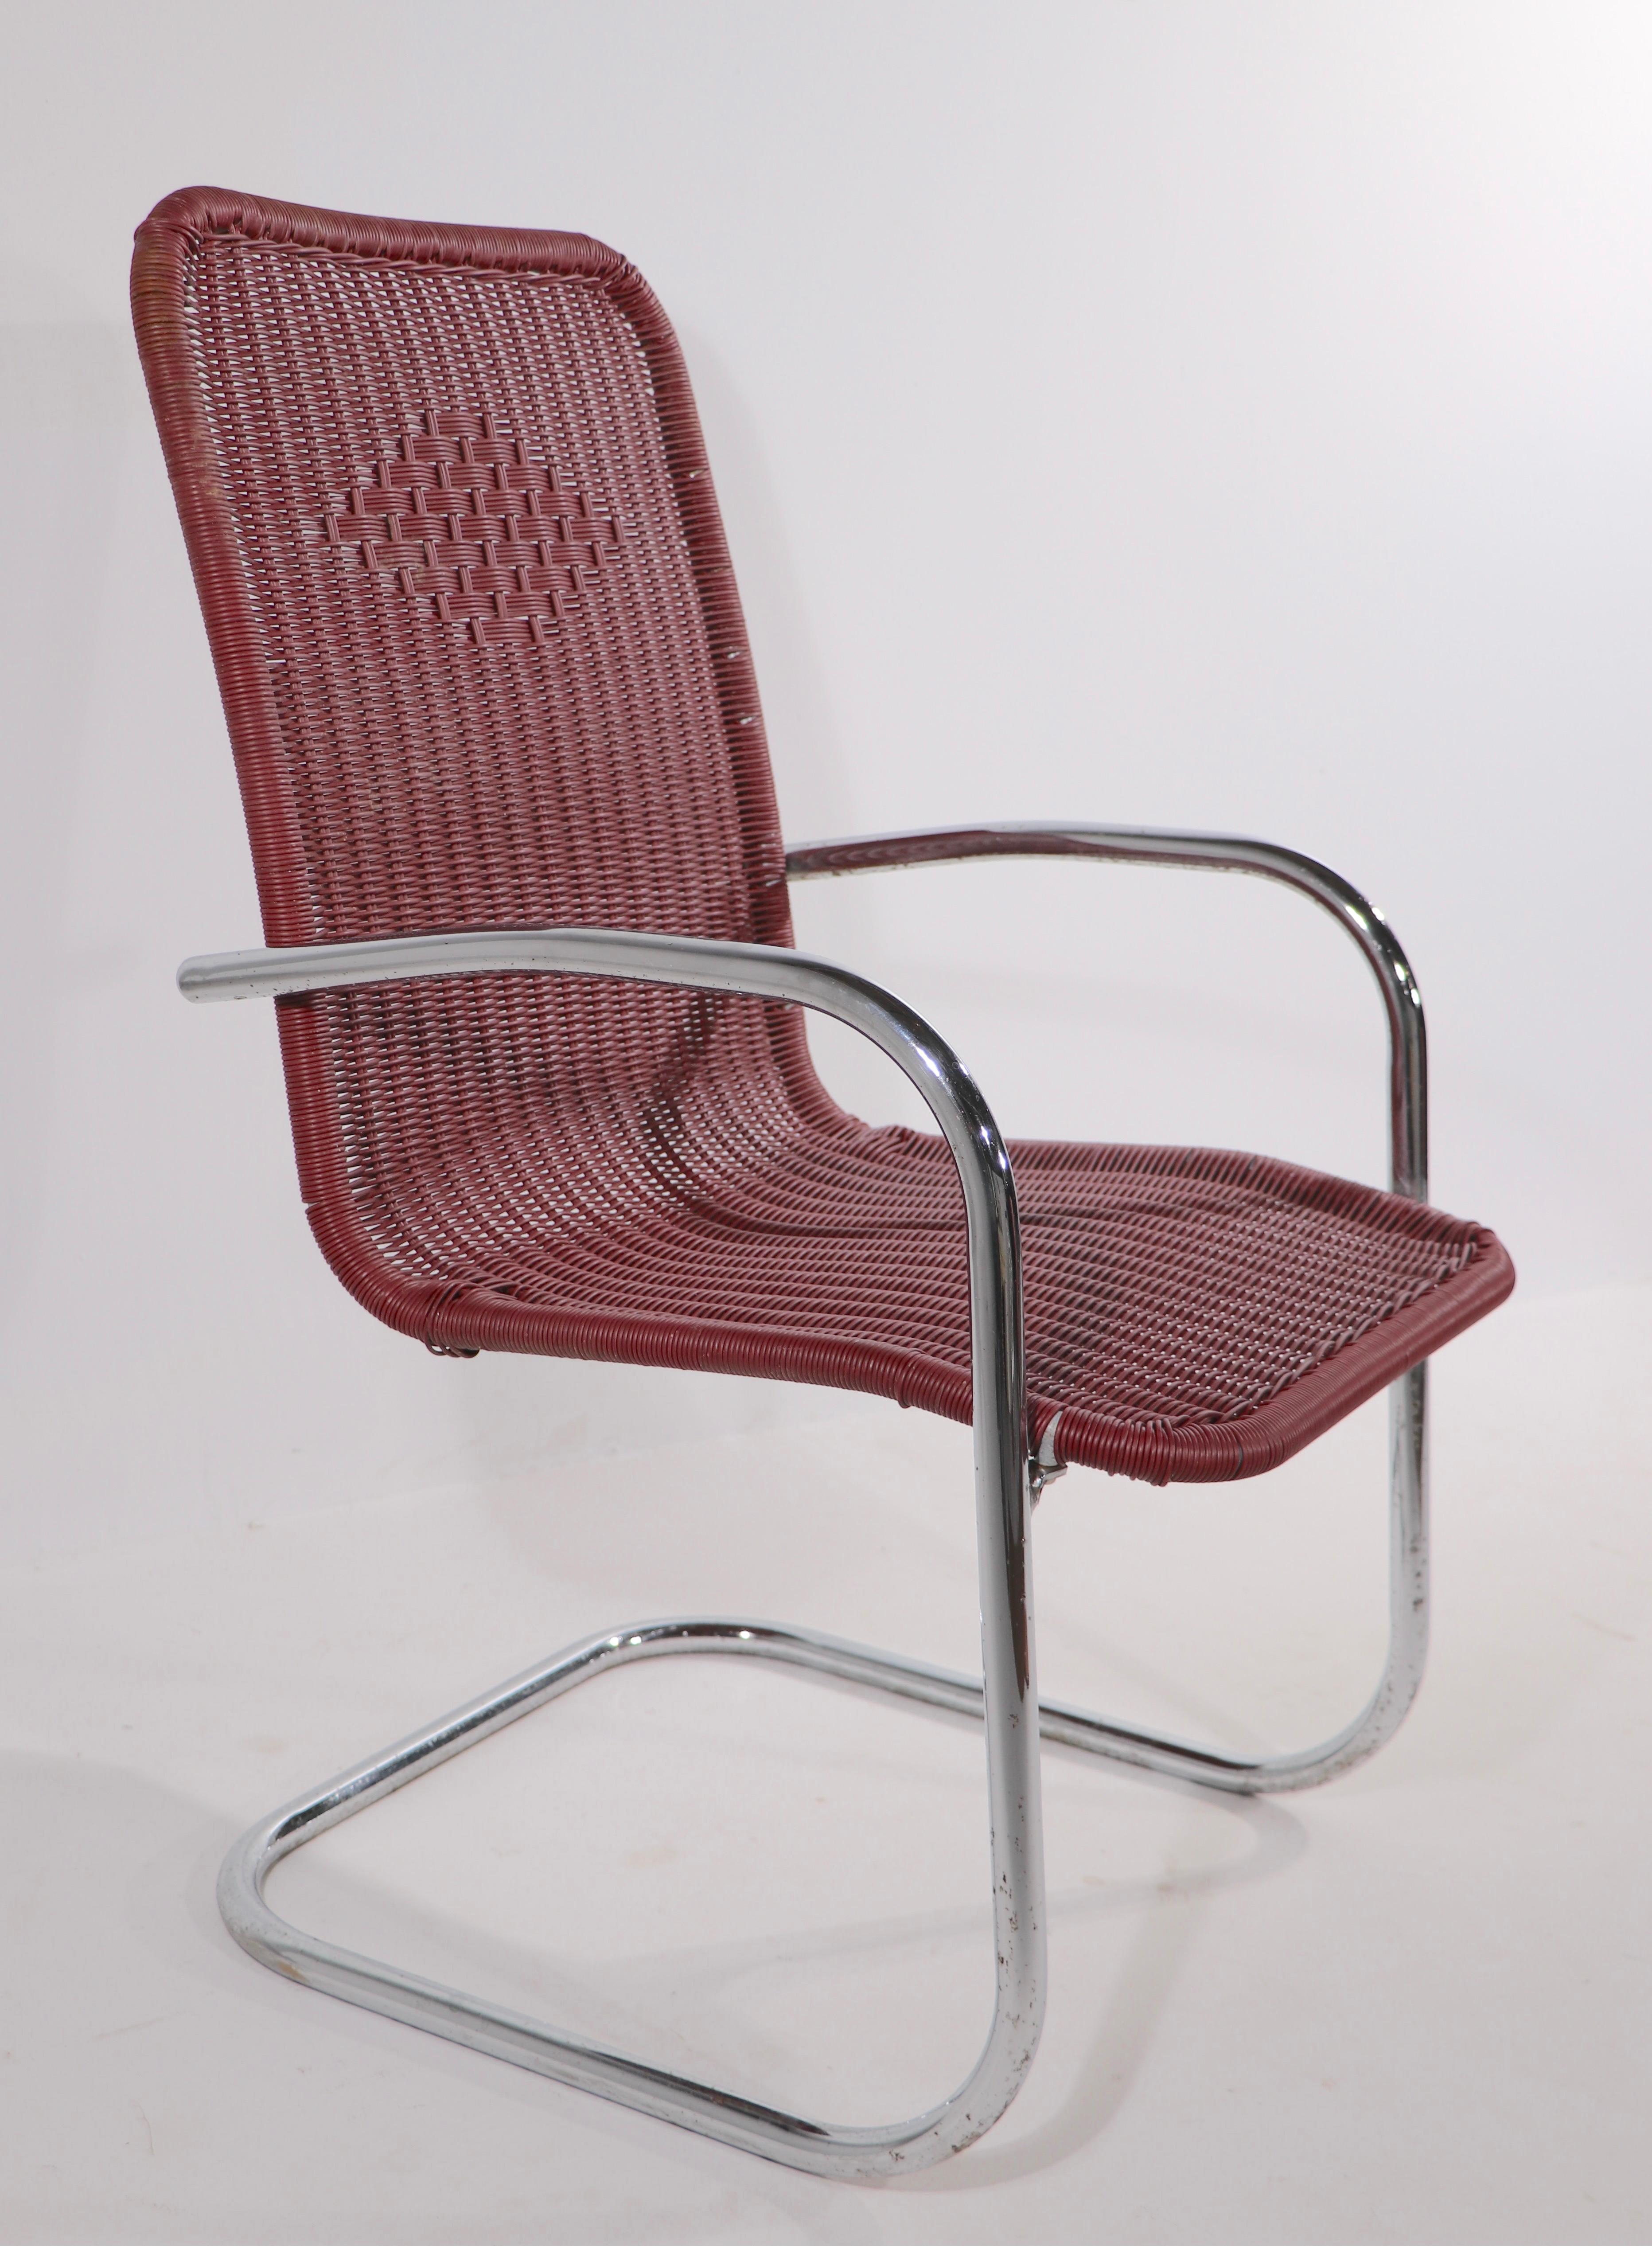 American Pr. Tubular Chrome and Woven Plastic Cantilevered Lounge Chairs For Sale